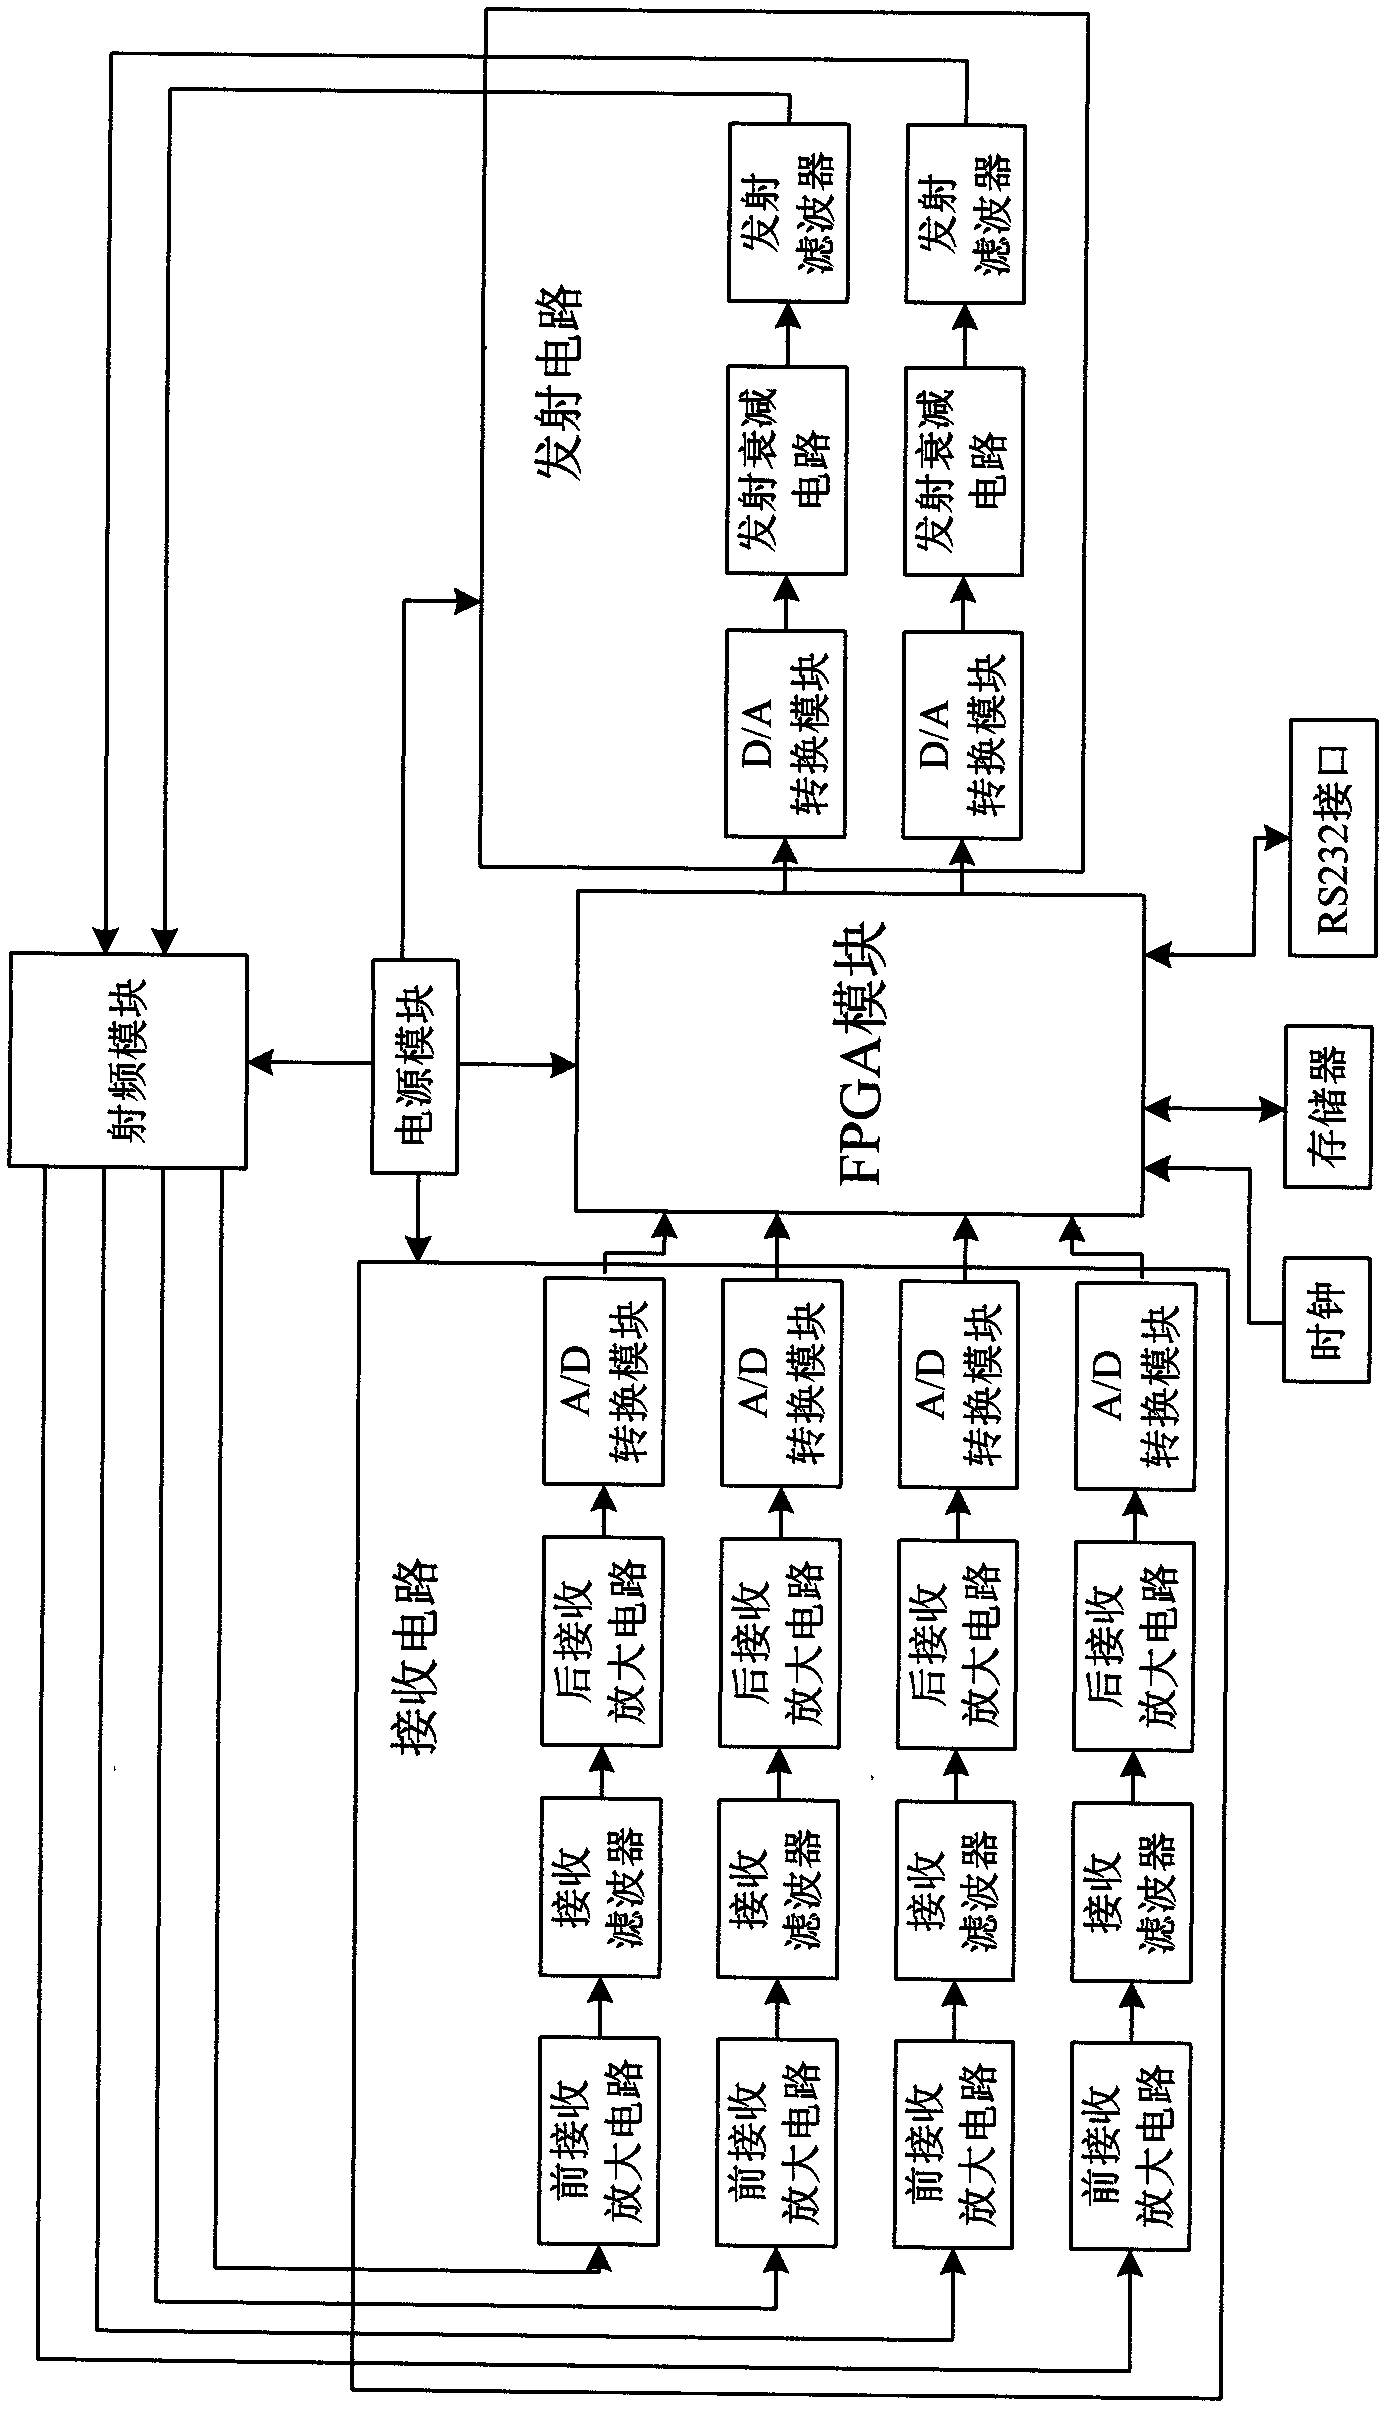 Automotive anti-collision radar signal processing device by use of 77GHz millimeter waves